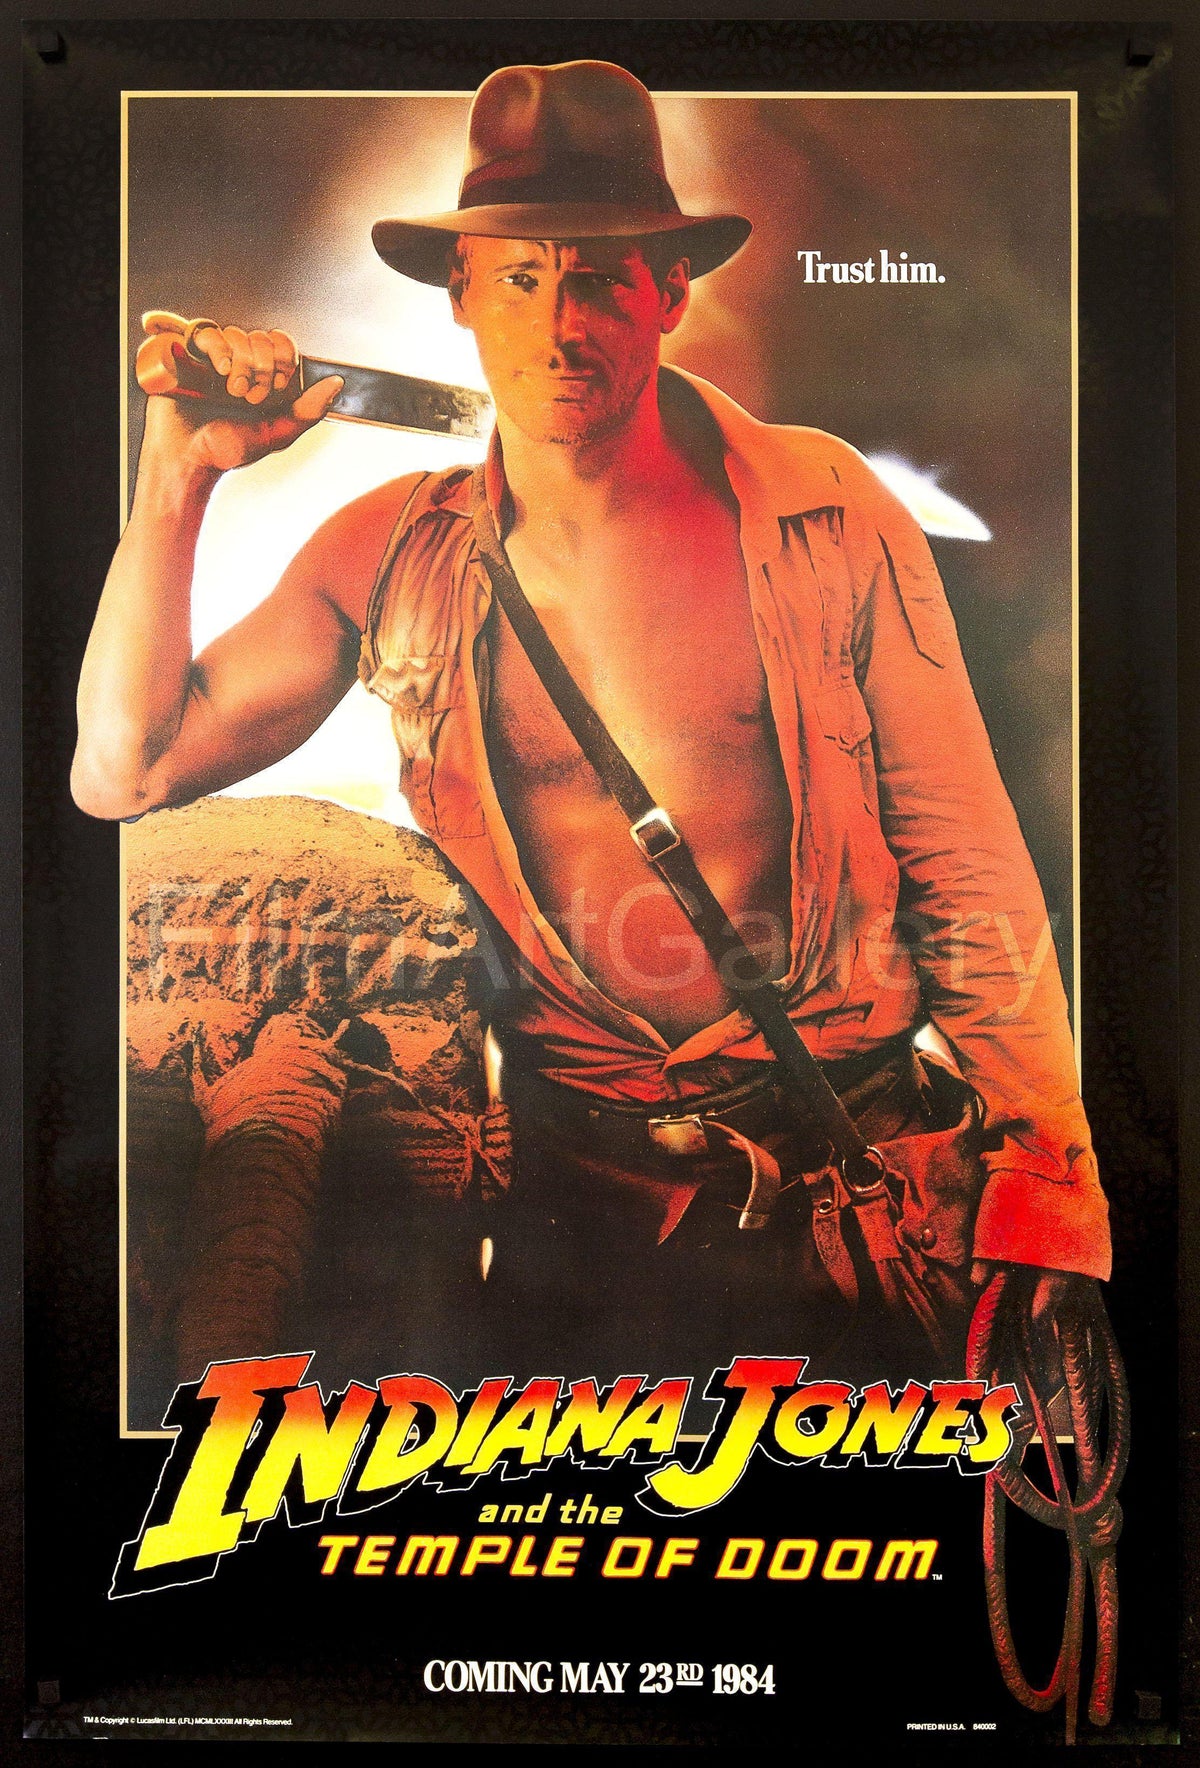 Indiana Jones and the Temple of Doom 1 Sheet (27x41) Original Vintage Movie Poster